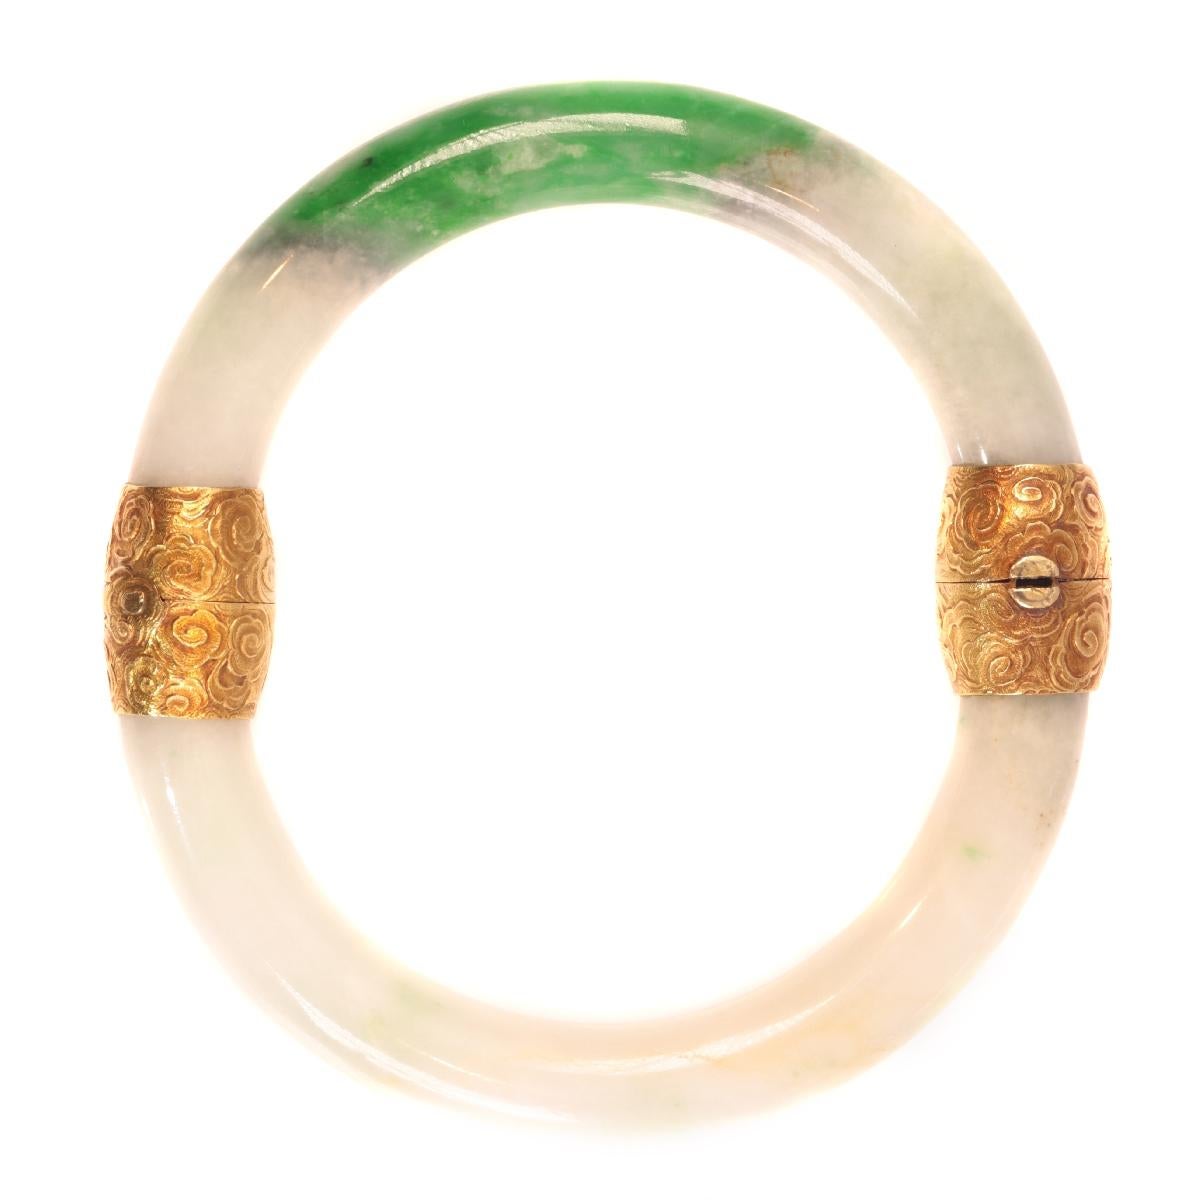 Victorian A-Jade Certified Bangle with 18 Karat Gold Closure and Hinge, 1880s For Sale 1